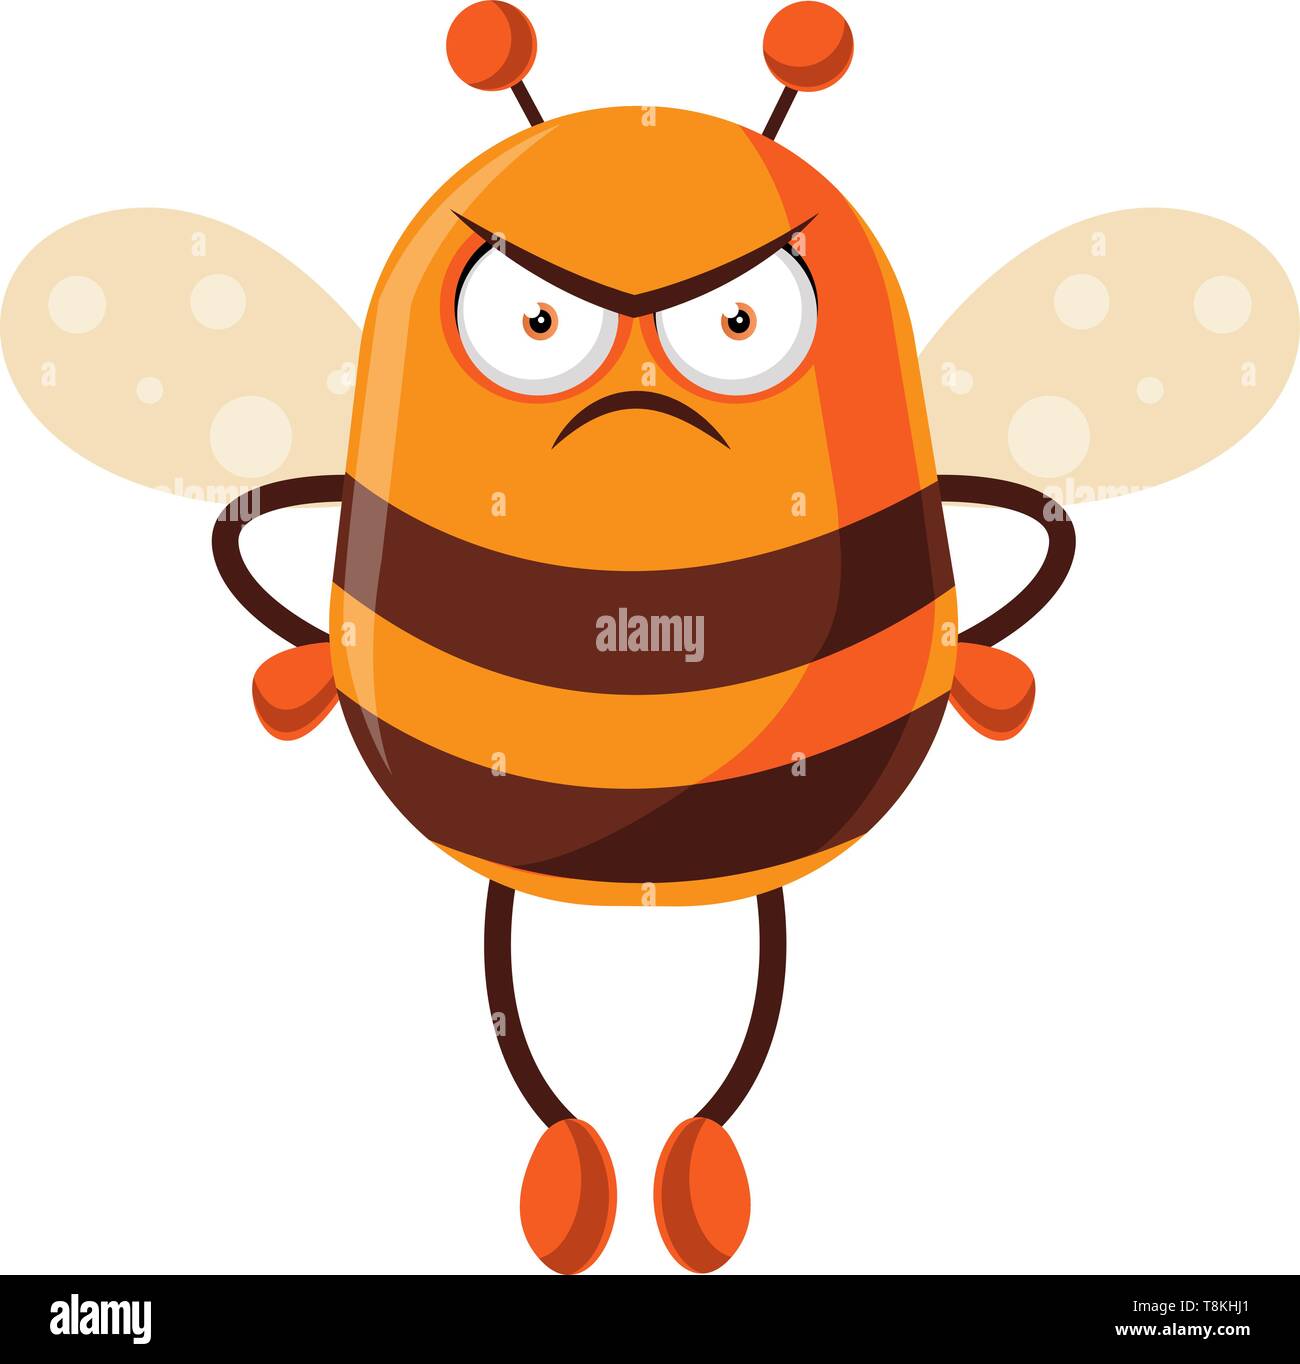 Bee looking mad, illustration, vector on white background. Stock Vector